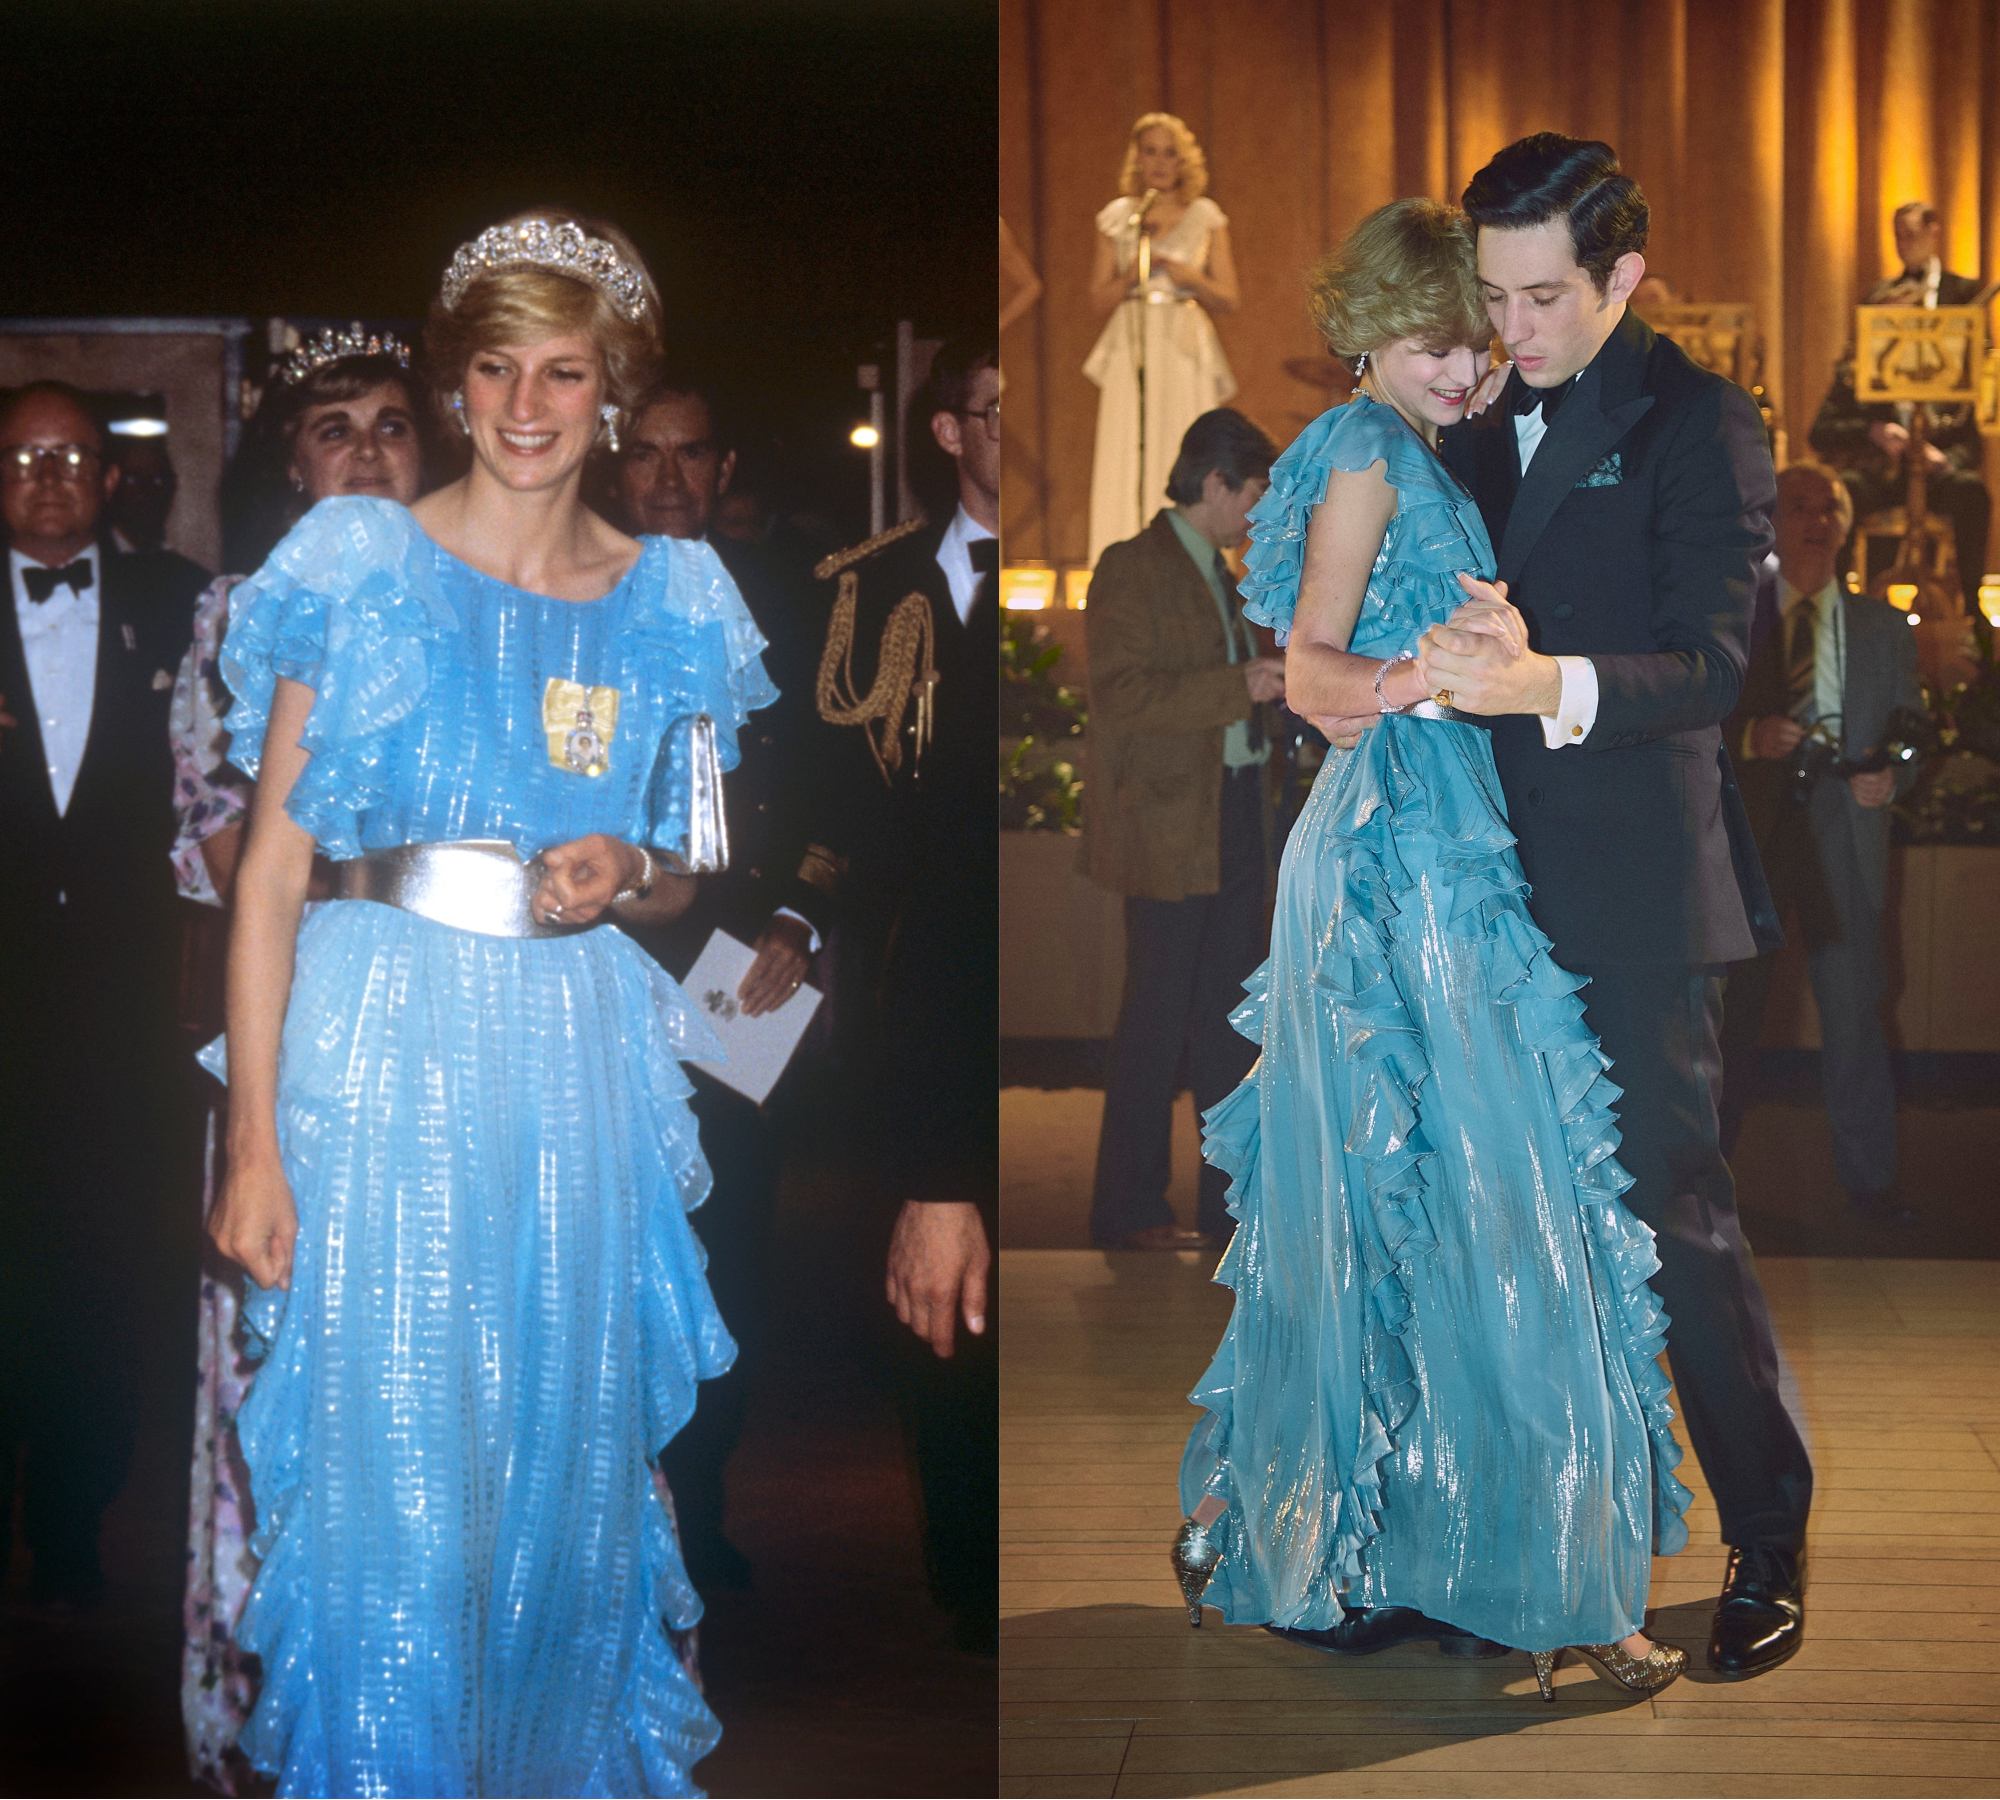 (L) Princess Diana in 1983 and (R) dancing with Charles on the show